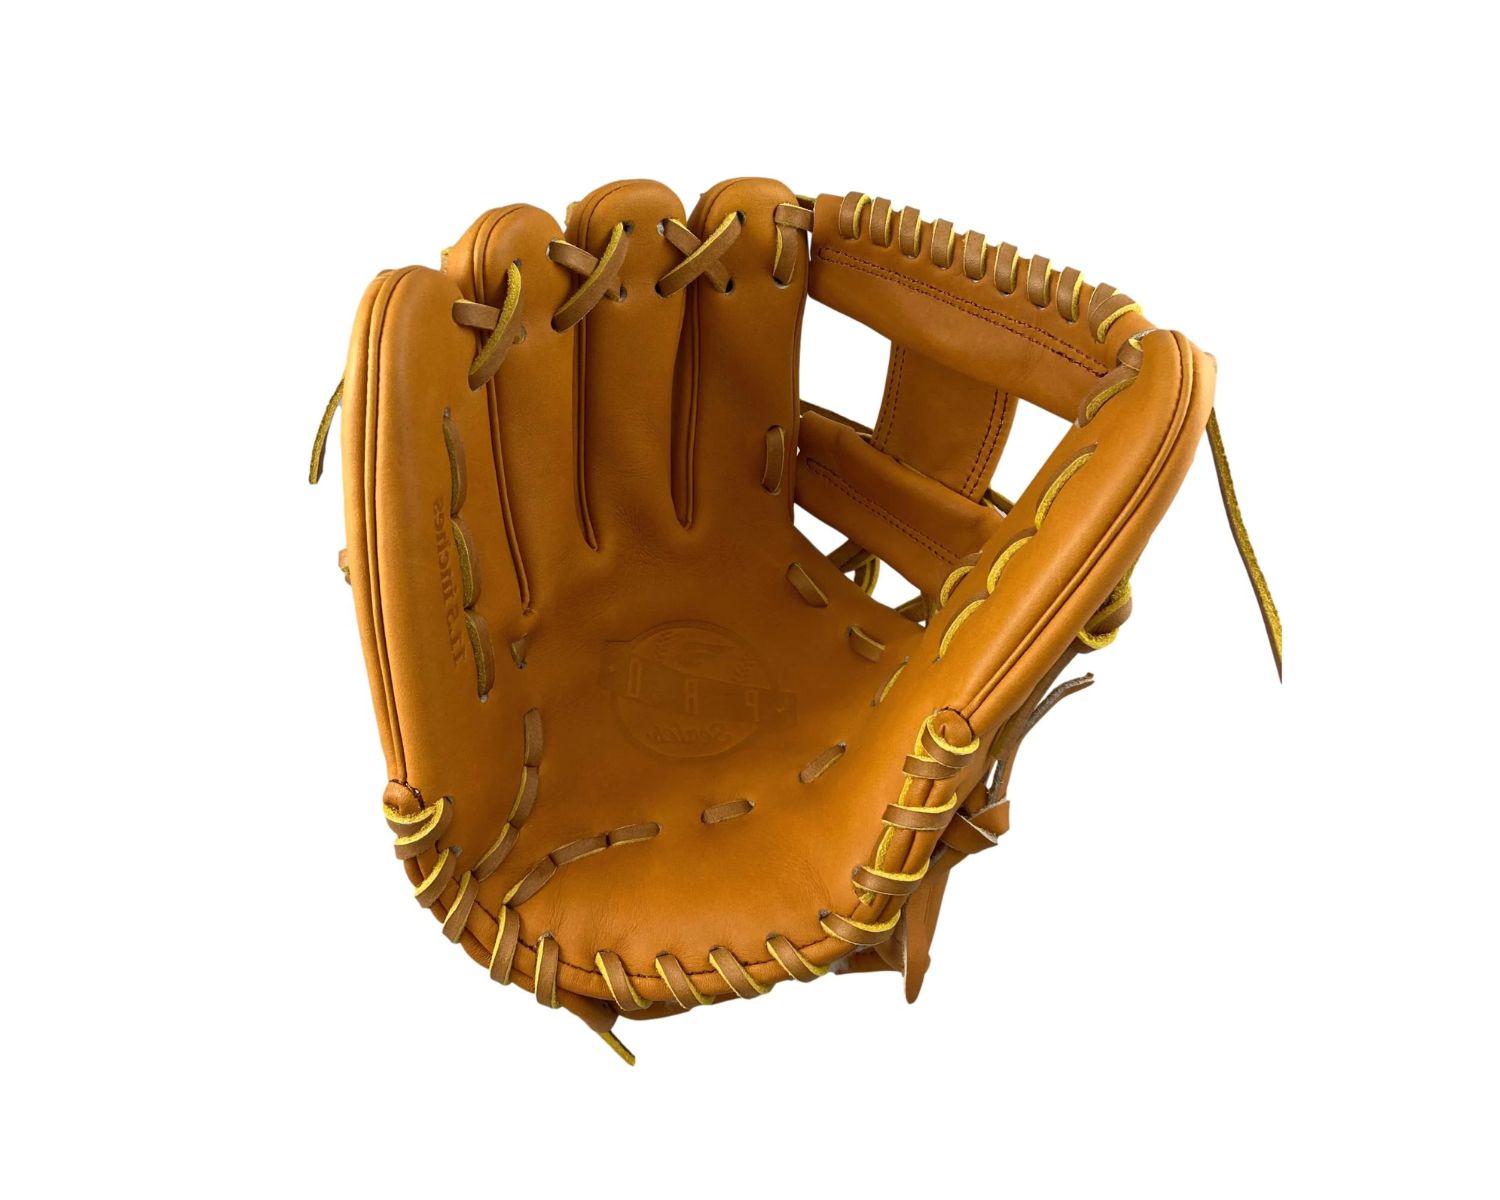 Baseball Glove Review: Find the Perfect Fit for Your Game